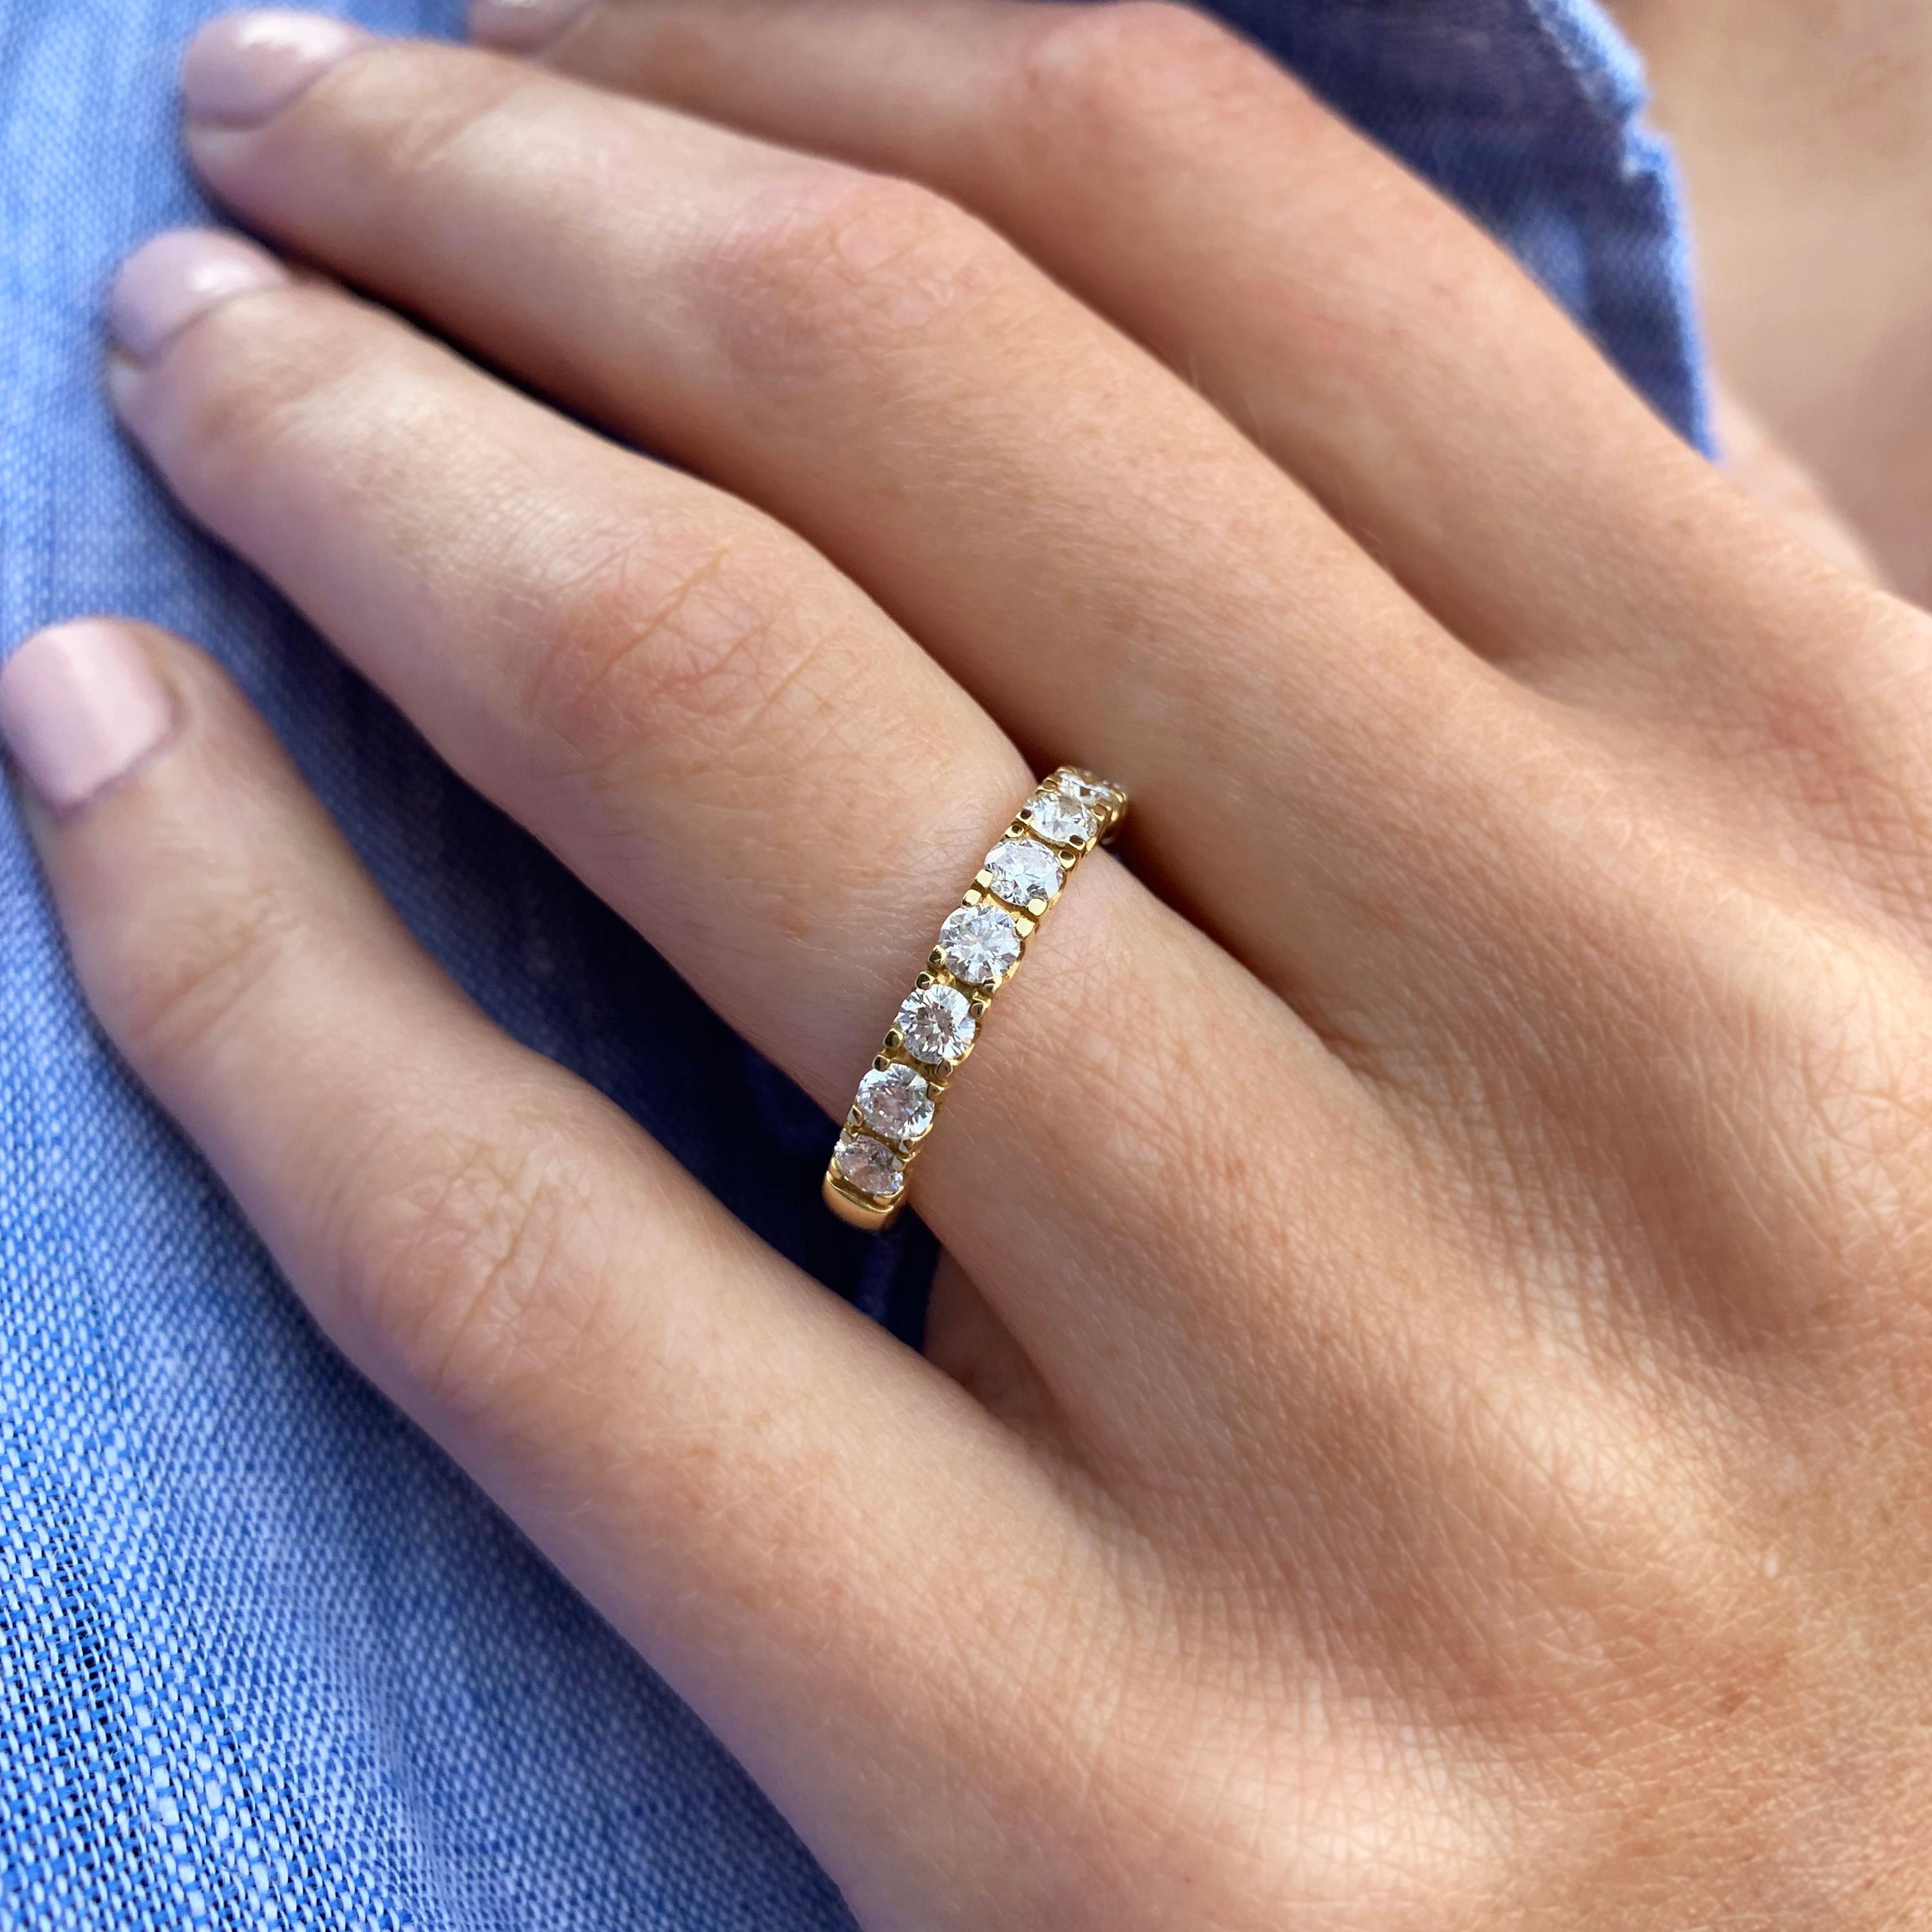 Modern classic diamond engagement, wedding or eternity ring. A classic diamond band crafted in yellow gold, each setting in meticulously defined set with ten round brilliant cut diamonds (1.00ct). The beautiful contrast between the warm 18k yellow